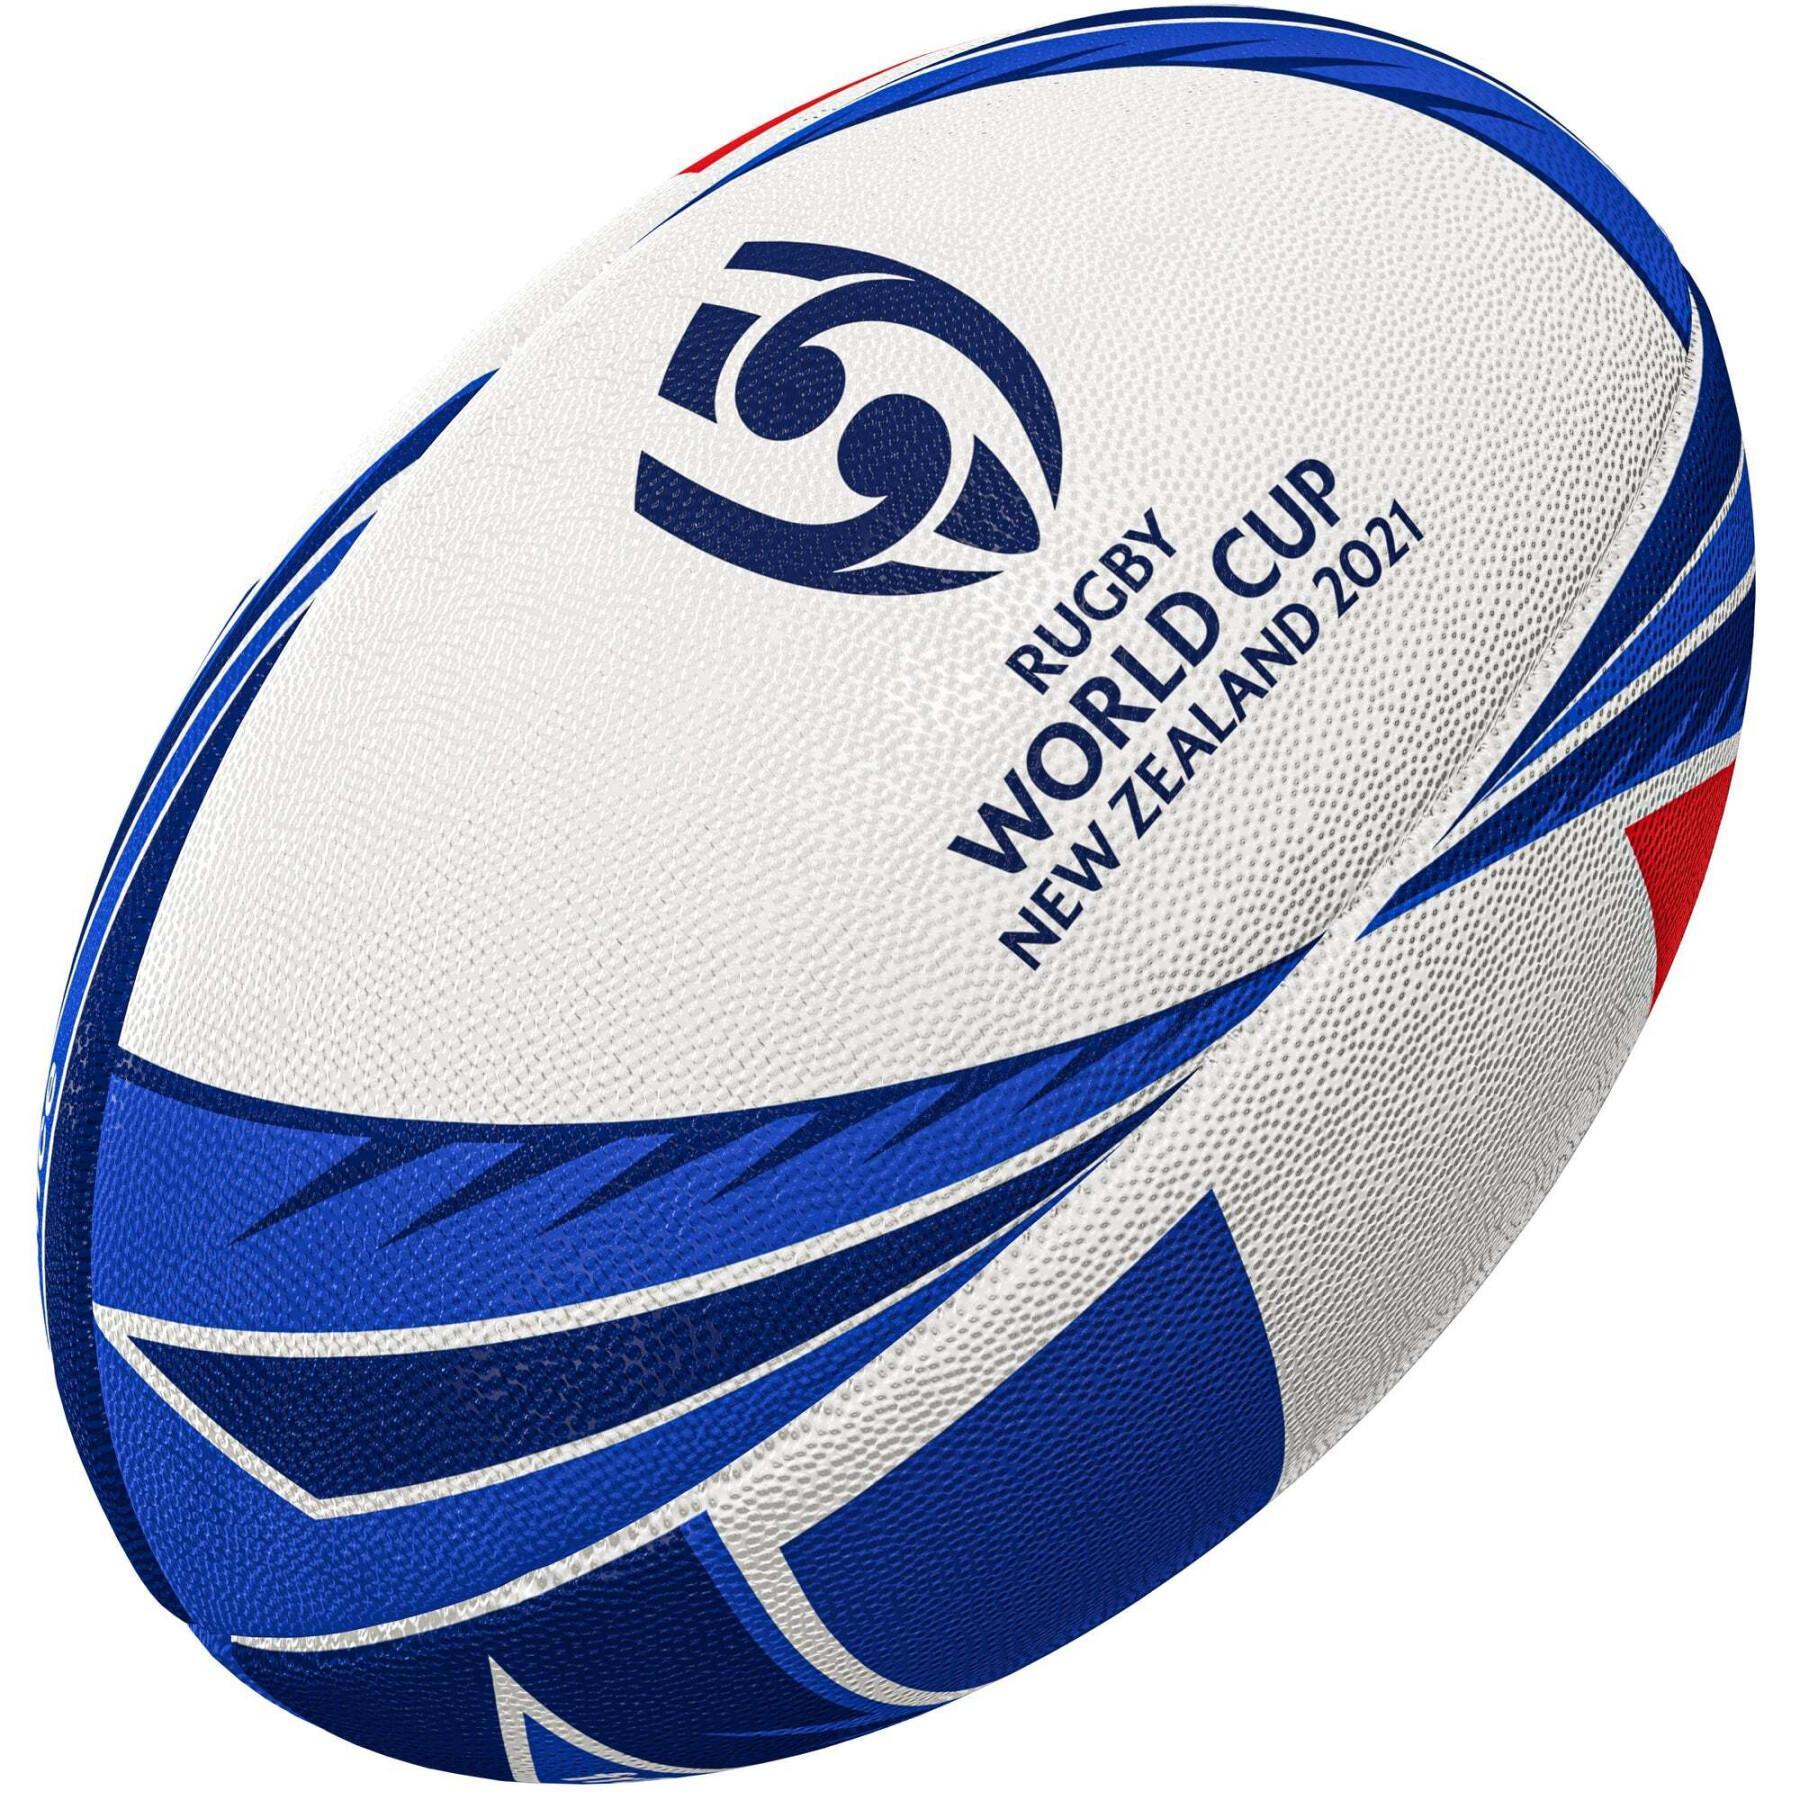 Pallone da rugby France Rugby Wolrd Cup 2021